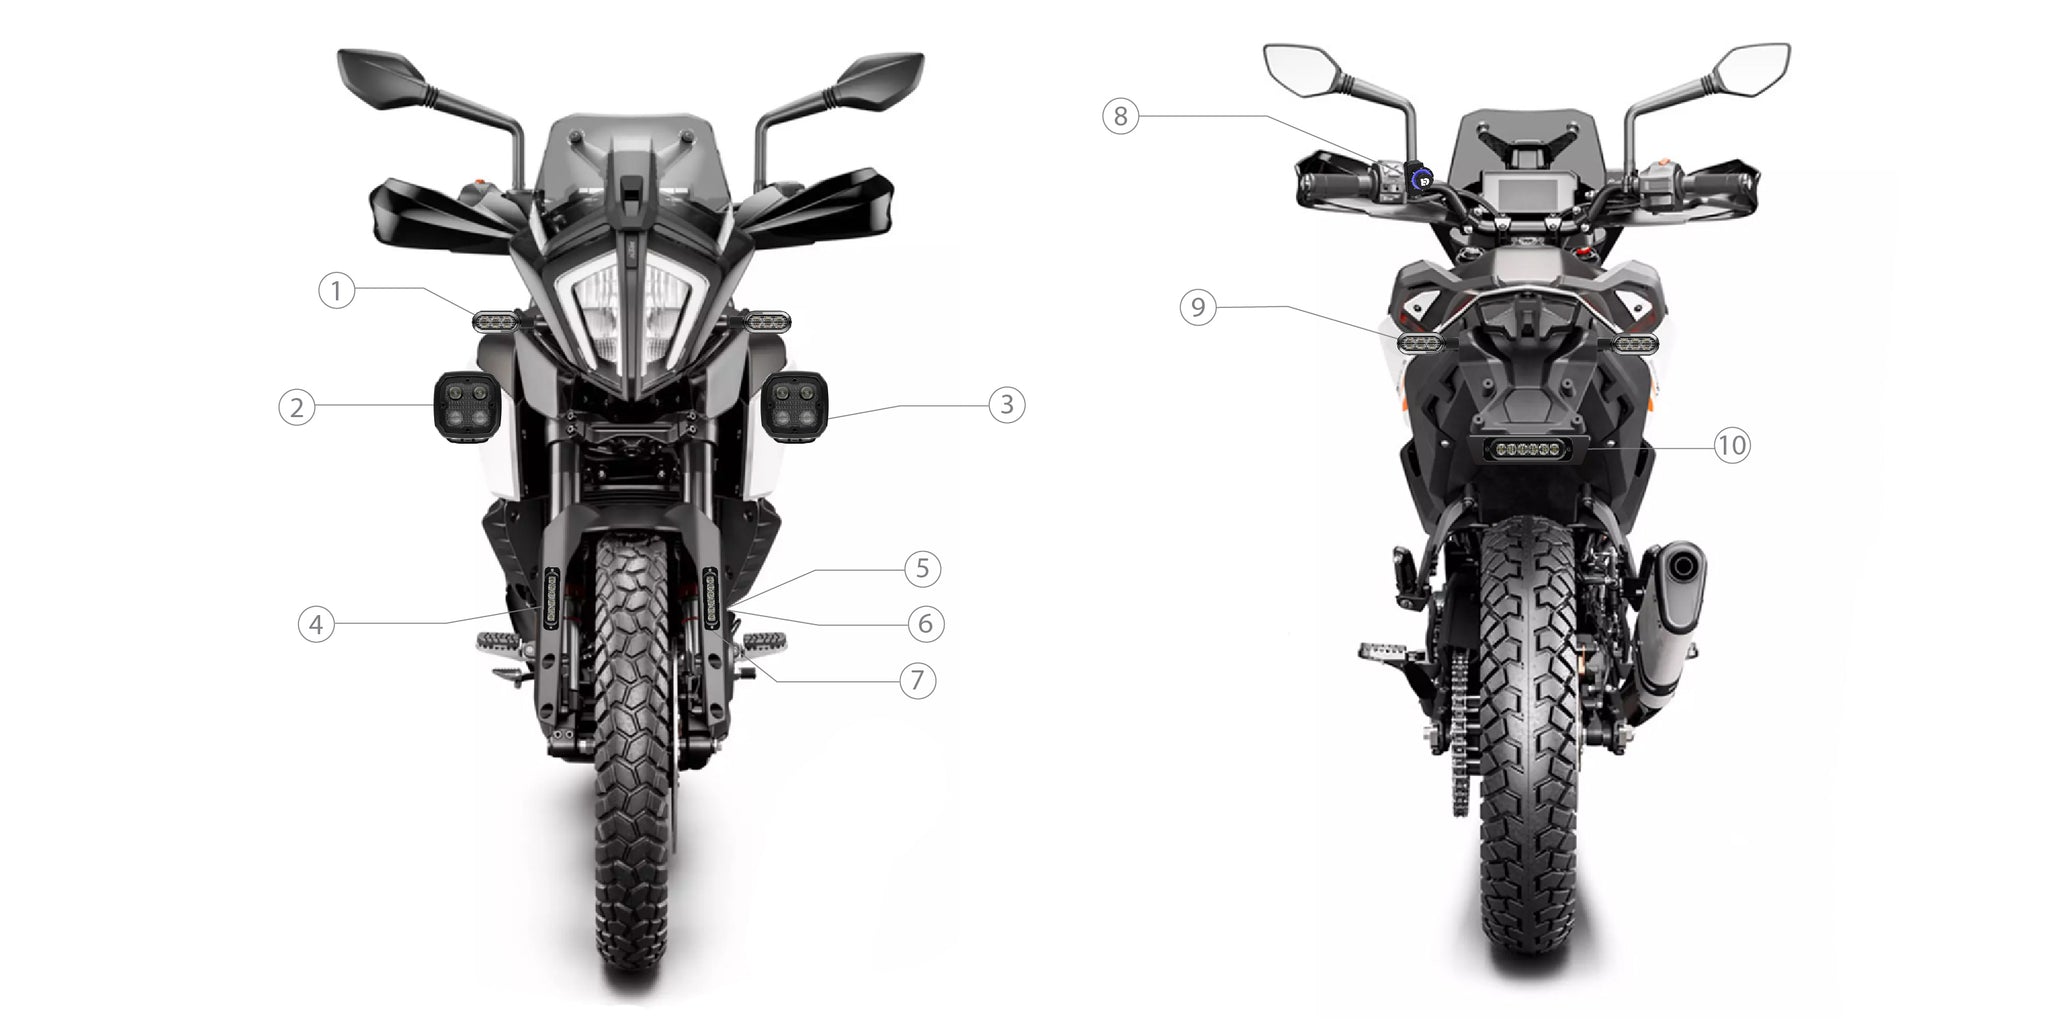 KTM 390 Adventure LED Light Outfitting Guide